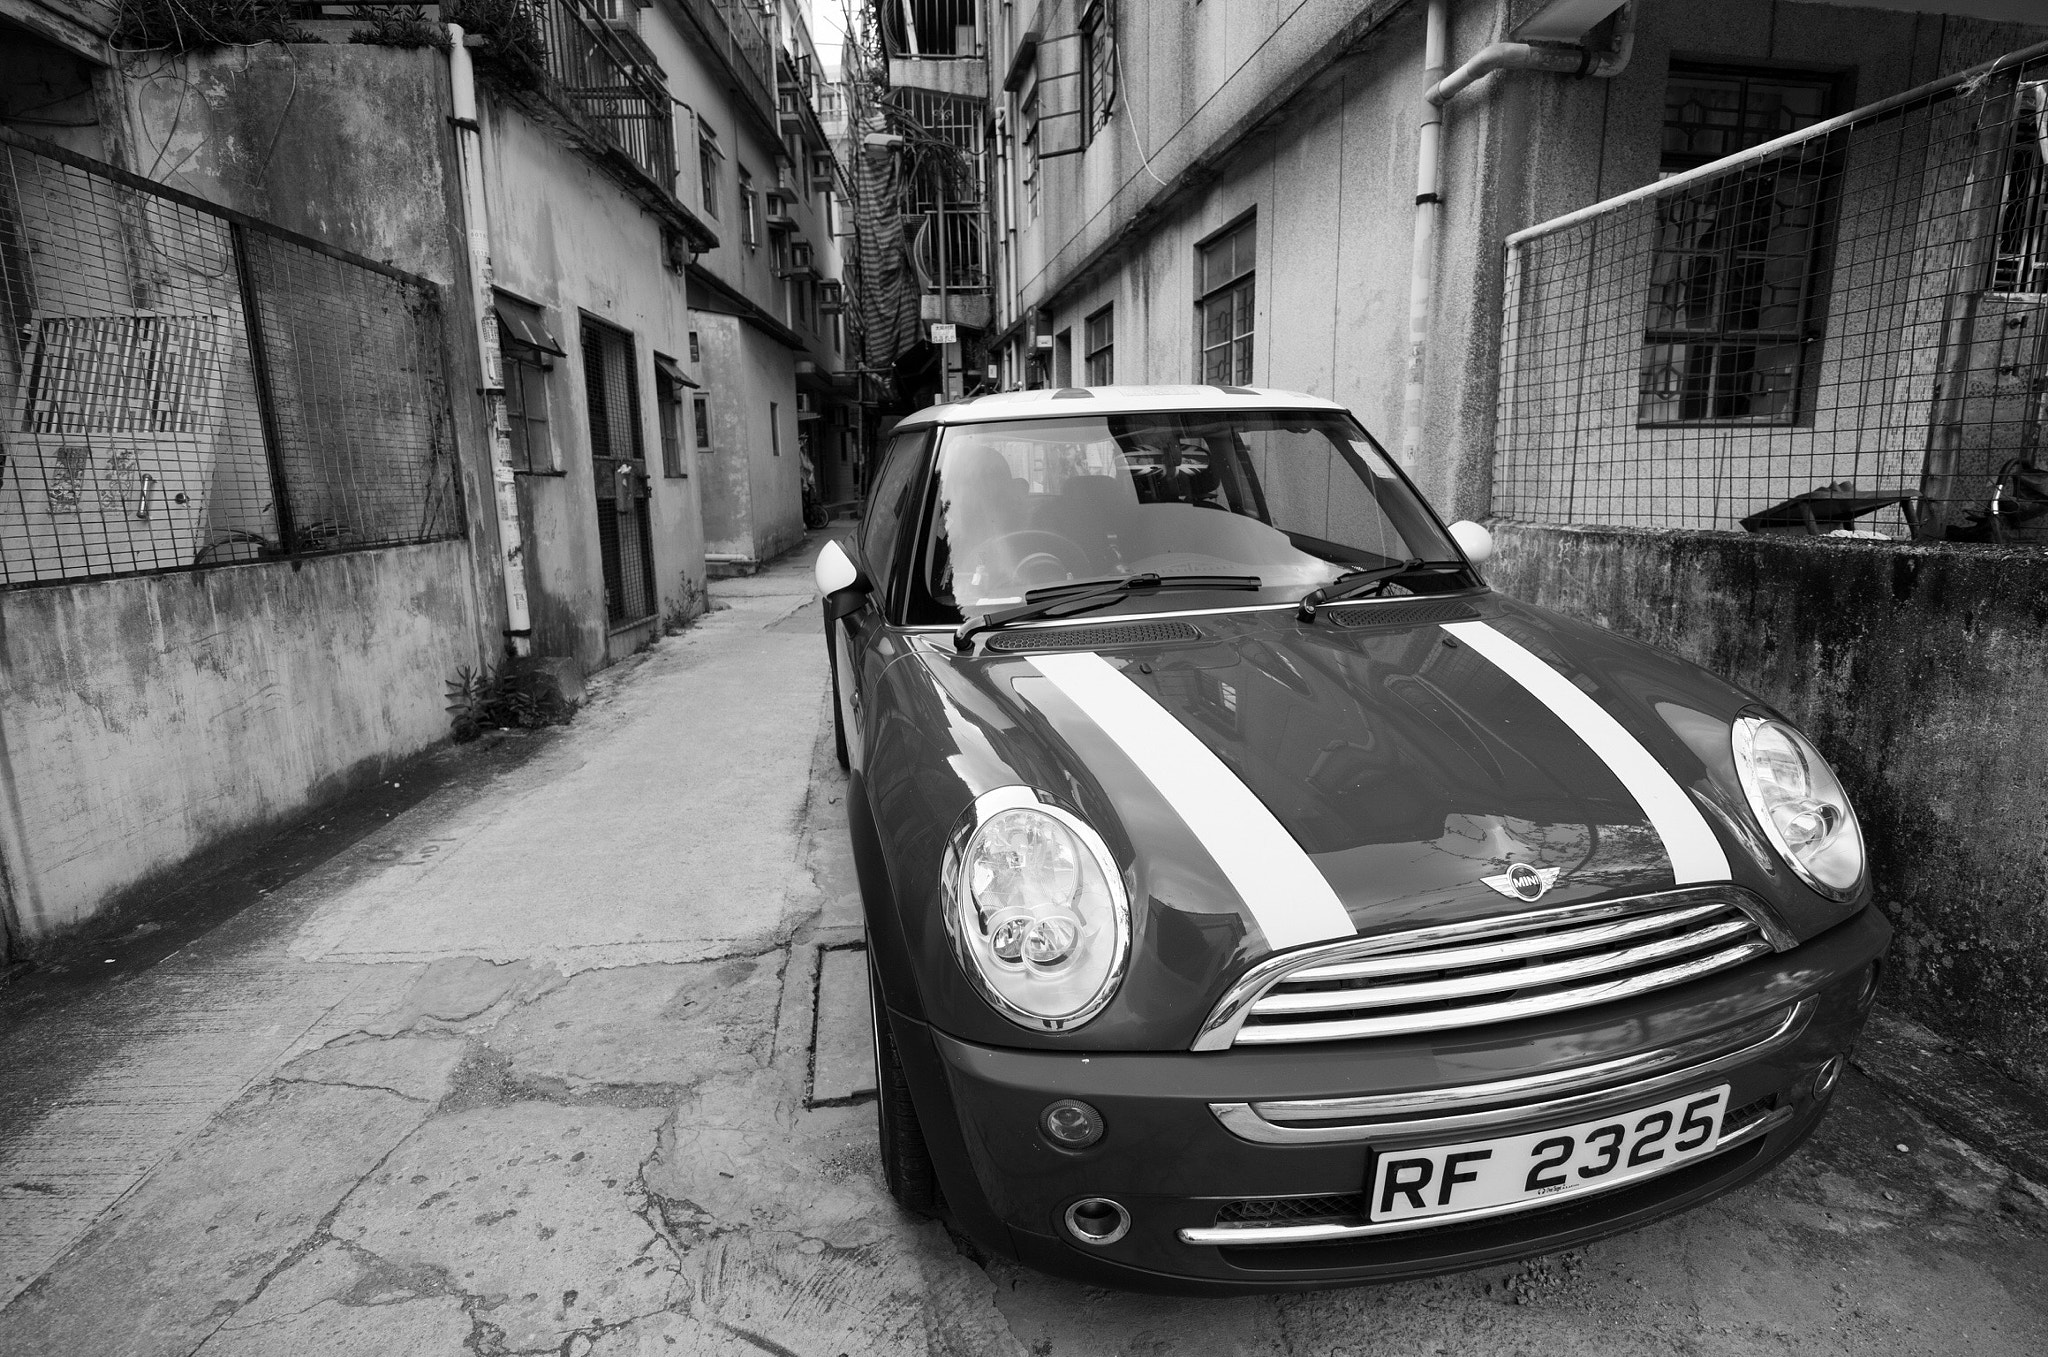 Super-Vario-Elmar-T  1:3.5-4.5 / 11-23 ASPH. sample photo. Old village and a new car ... photography